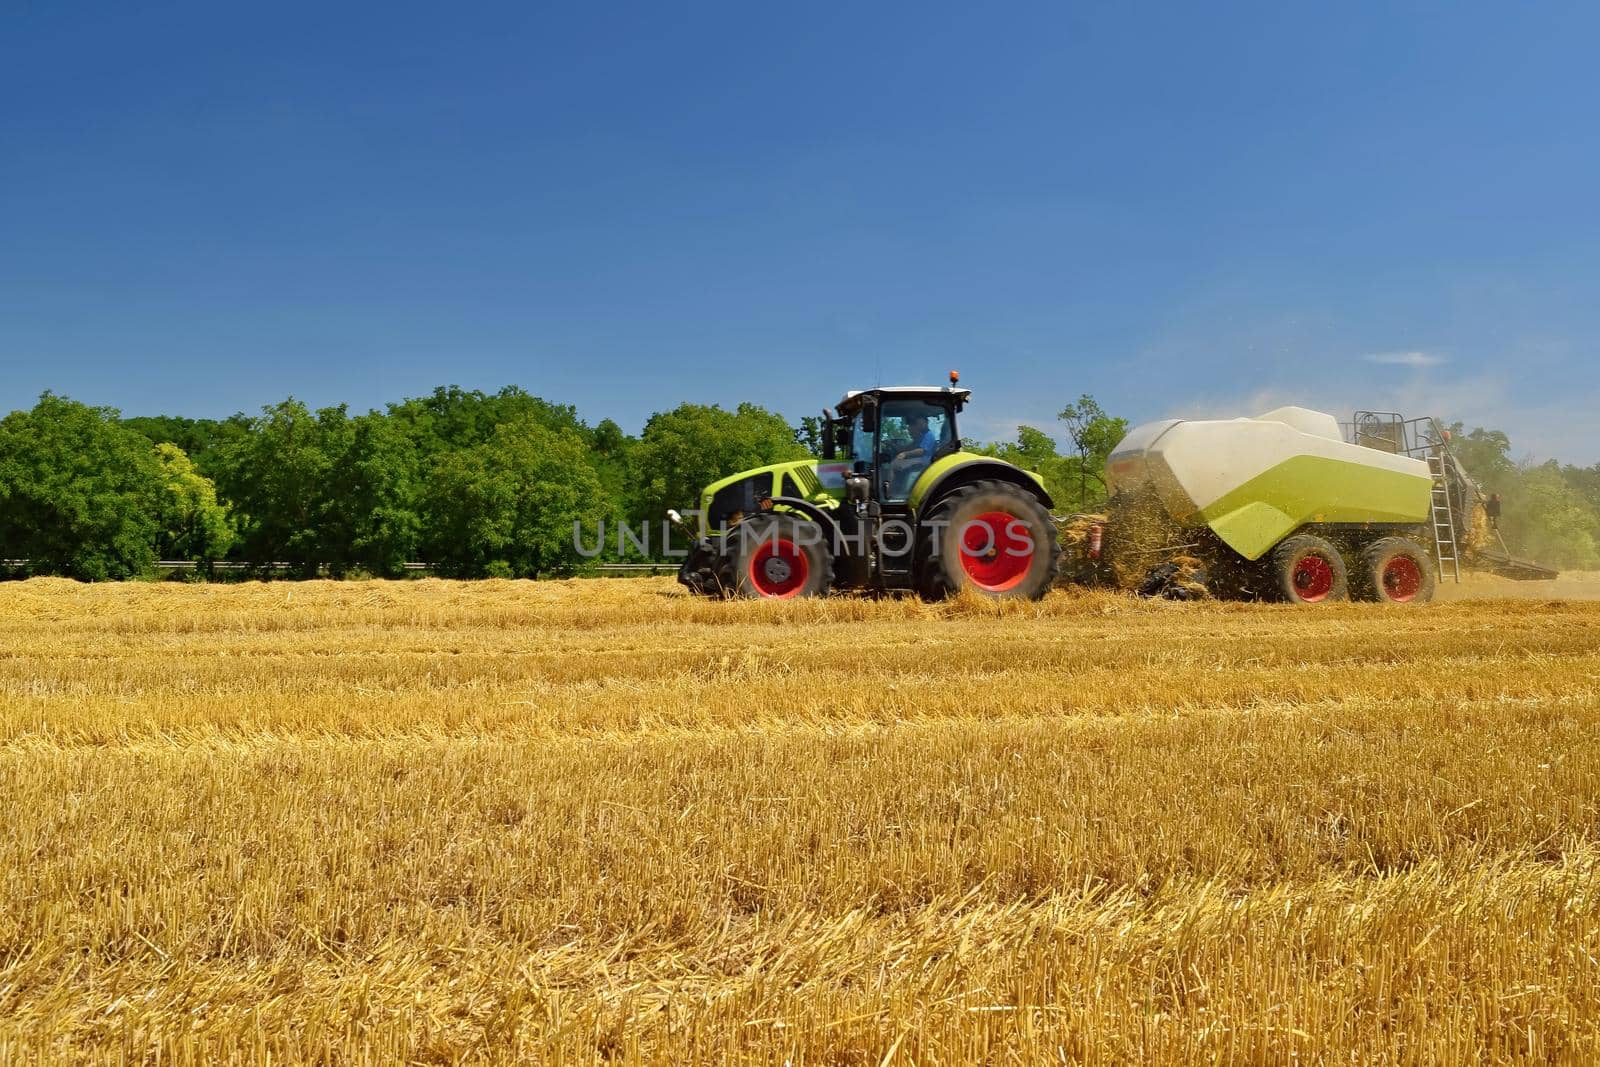 Harvester agriculture machine harvesting golden ripe corn field. Tractor - traditional summer background with an industrial theme.